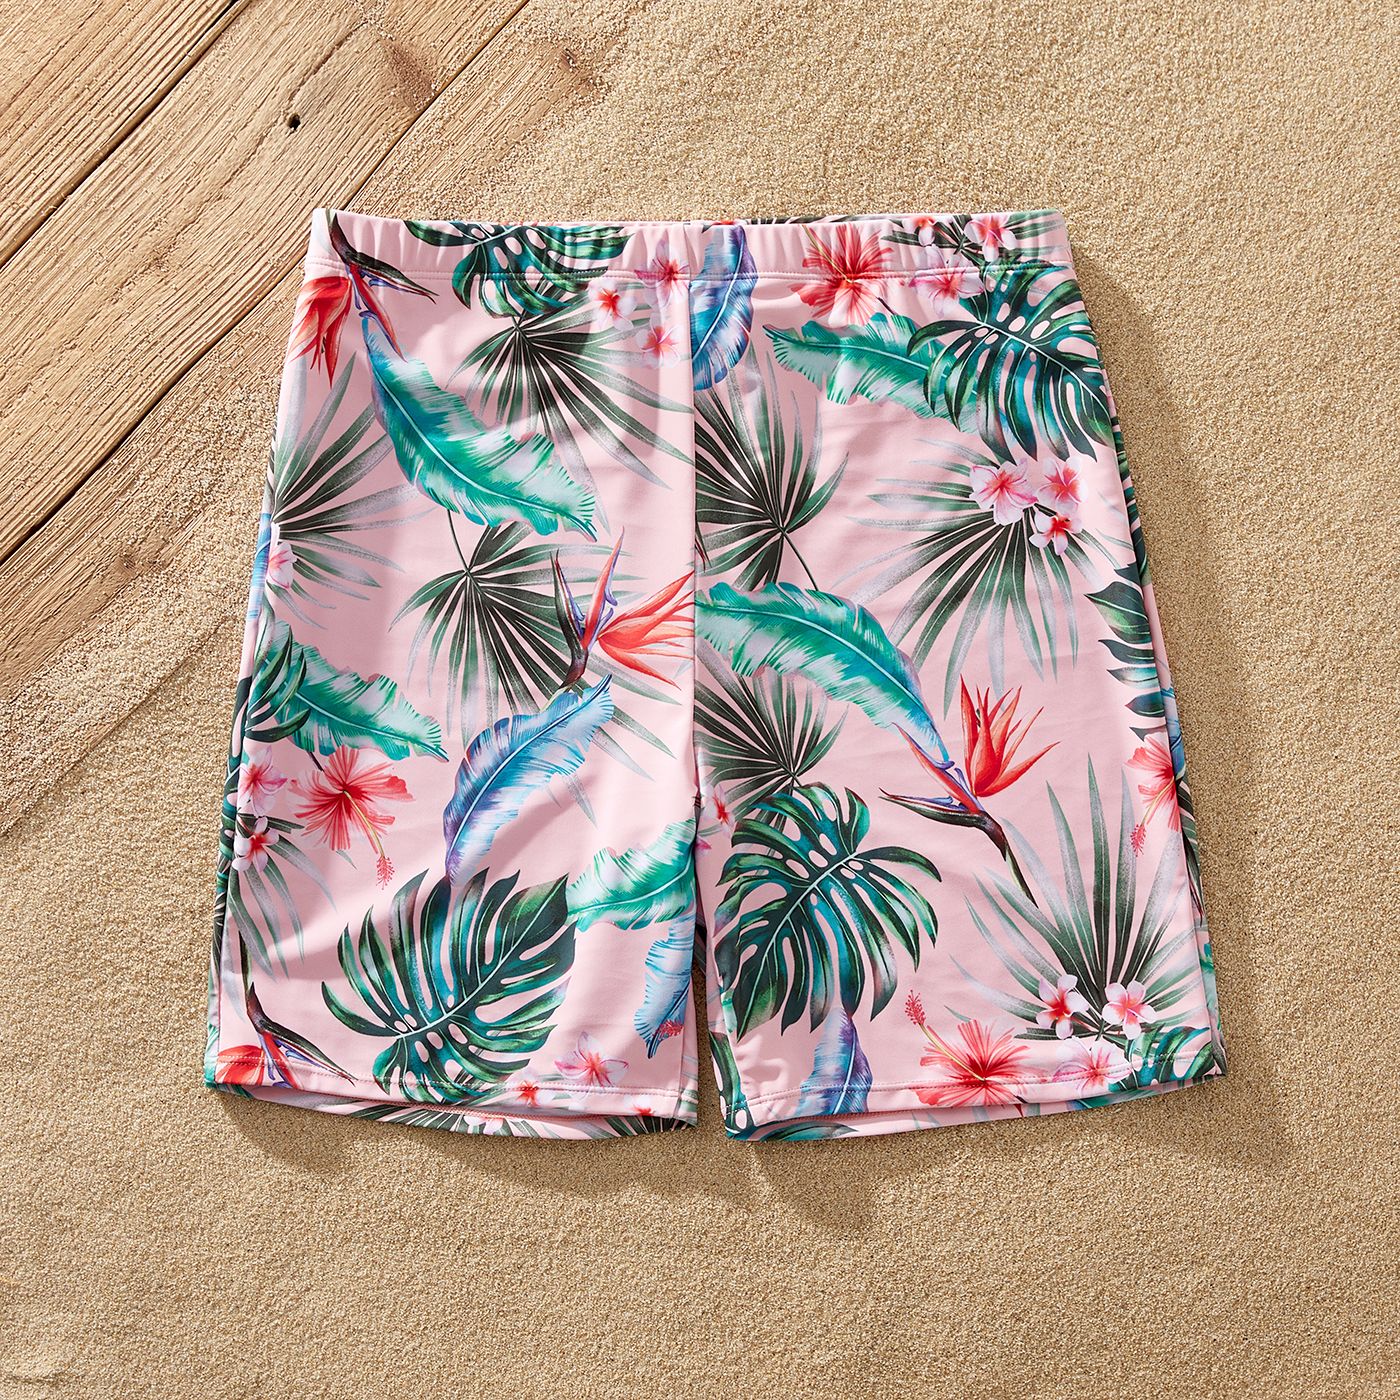 Family Matching Floral Print Ruffled One-piece Swimsuit Or Swim Trunks Shorts